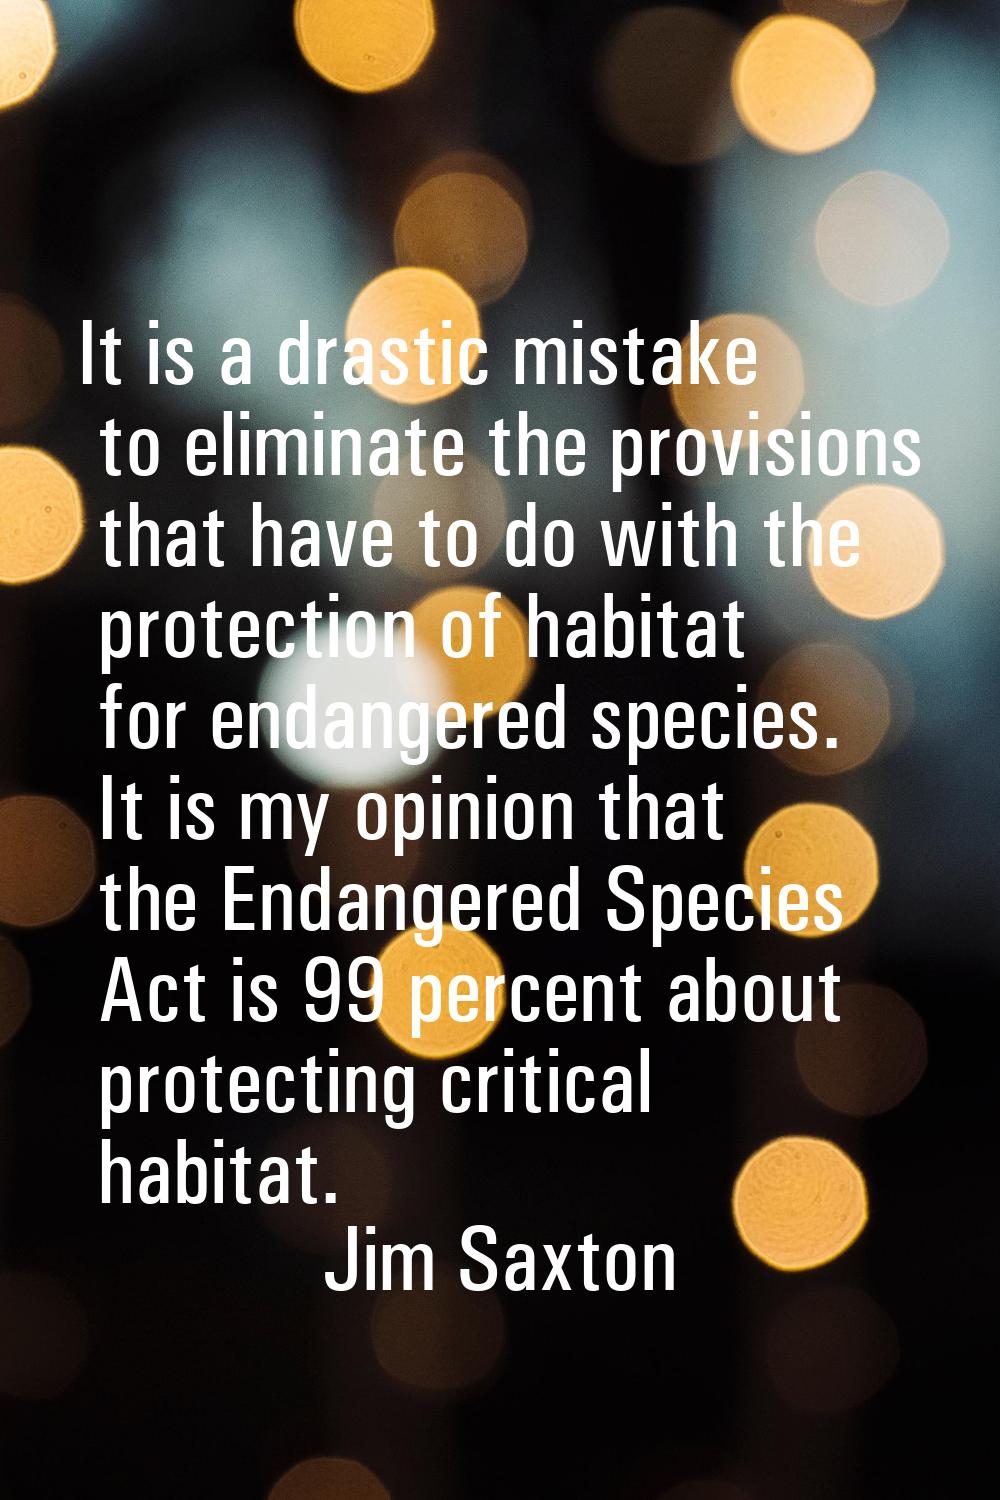 It is a drastic mistake to eliminate the provisions that have to do with the protection of habitat 